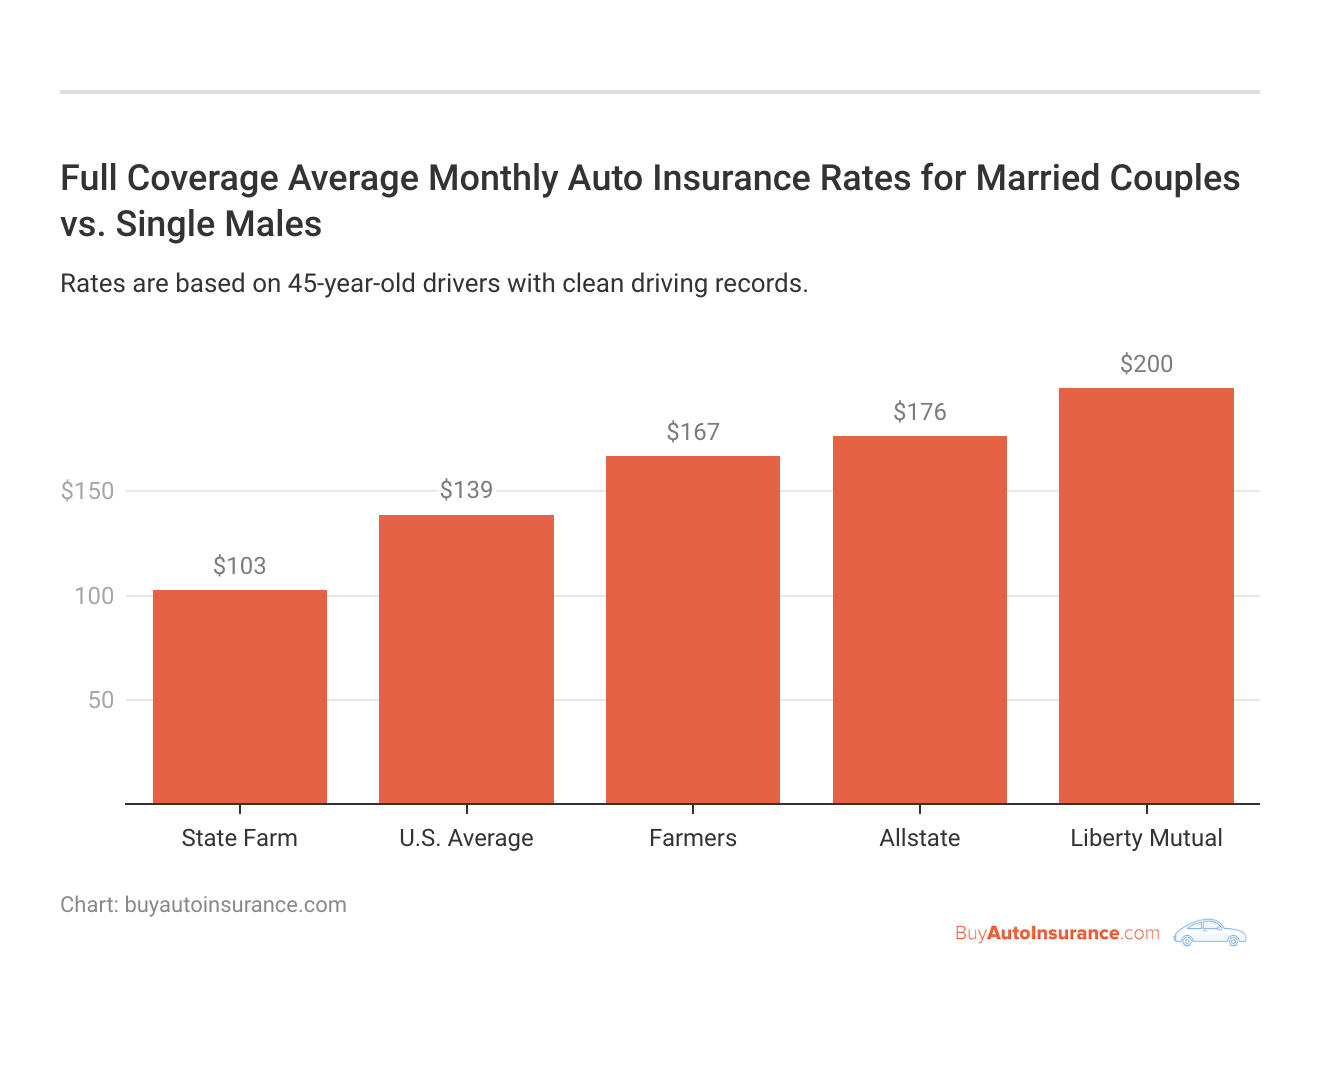 <h3>Full Coverage Average Monthly Auto Insurance Rates for Married Couples vs. Single Males</h3>